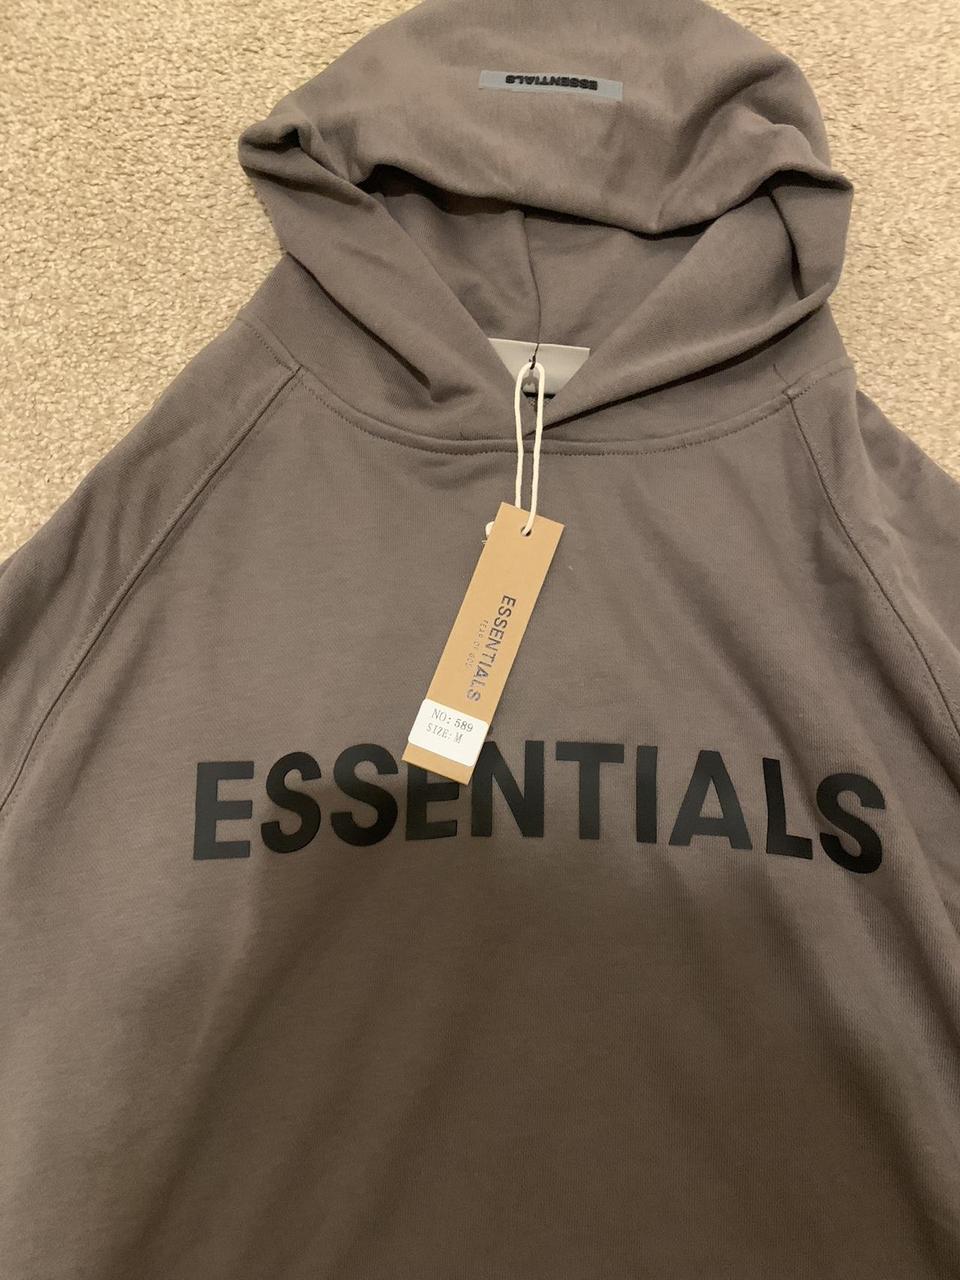 Essentials hoodie. Worn it once . Perfect condition... - Depop